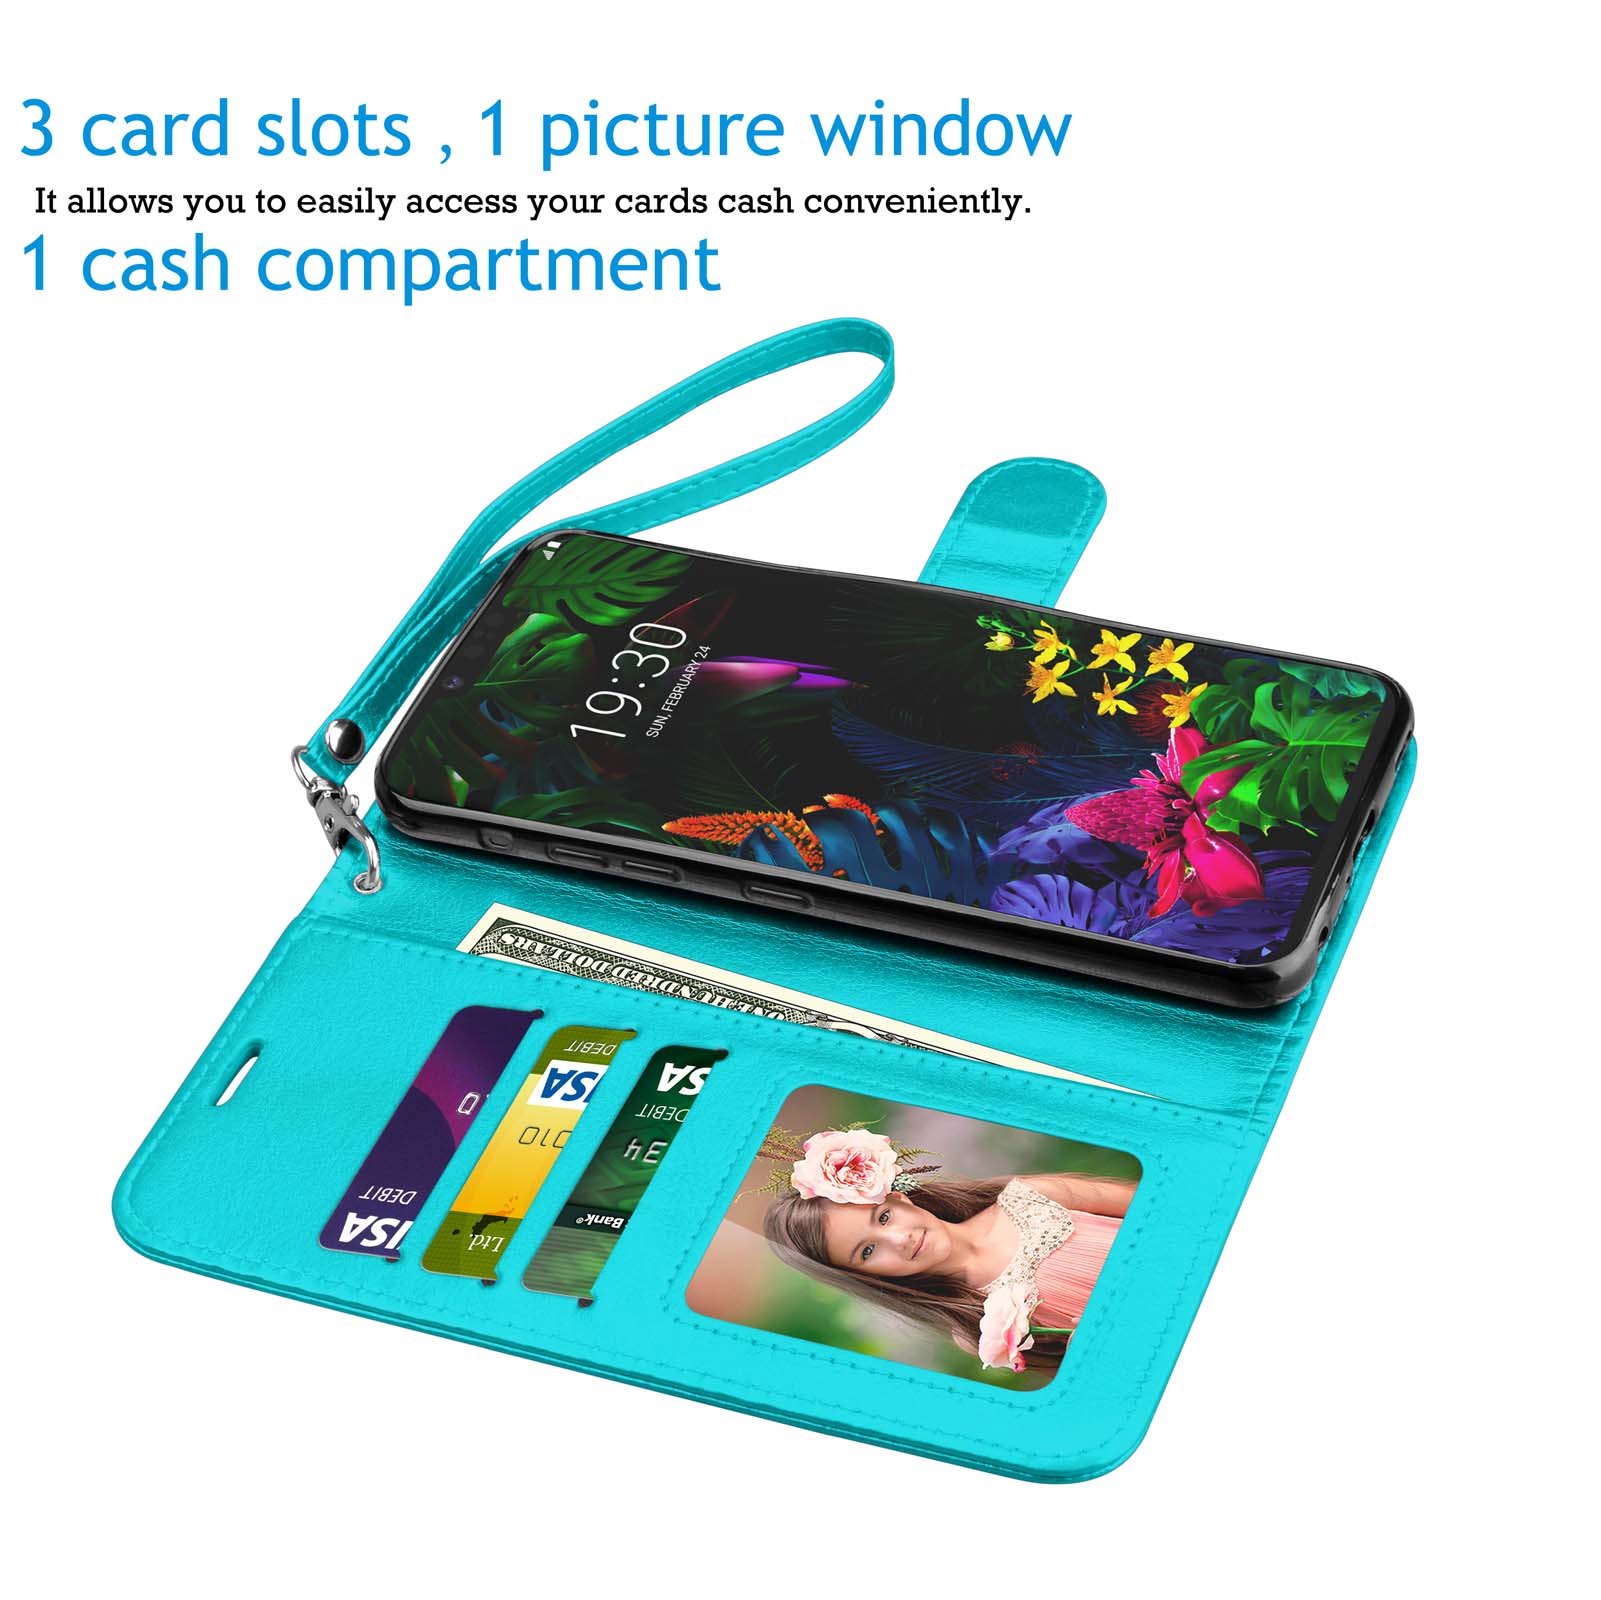 LG G8 Case, 2019 LG G8 ThinQ Wallet Cover, LG G8 PU Leather Case, Njjex [Wrist Strap] Flip Folio [Kickstand ] PU leather Wallet Case 3 ID&Credit Card Pockets for LG G8 6.1" 2019 -Blue - image 3 of 5